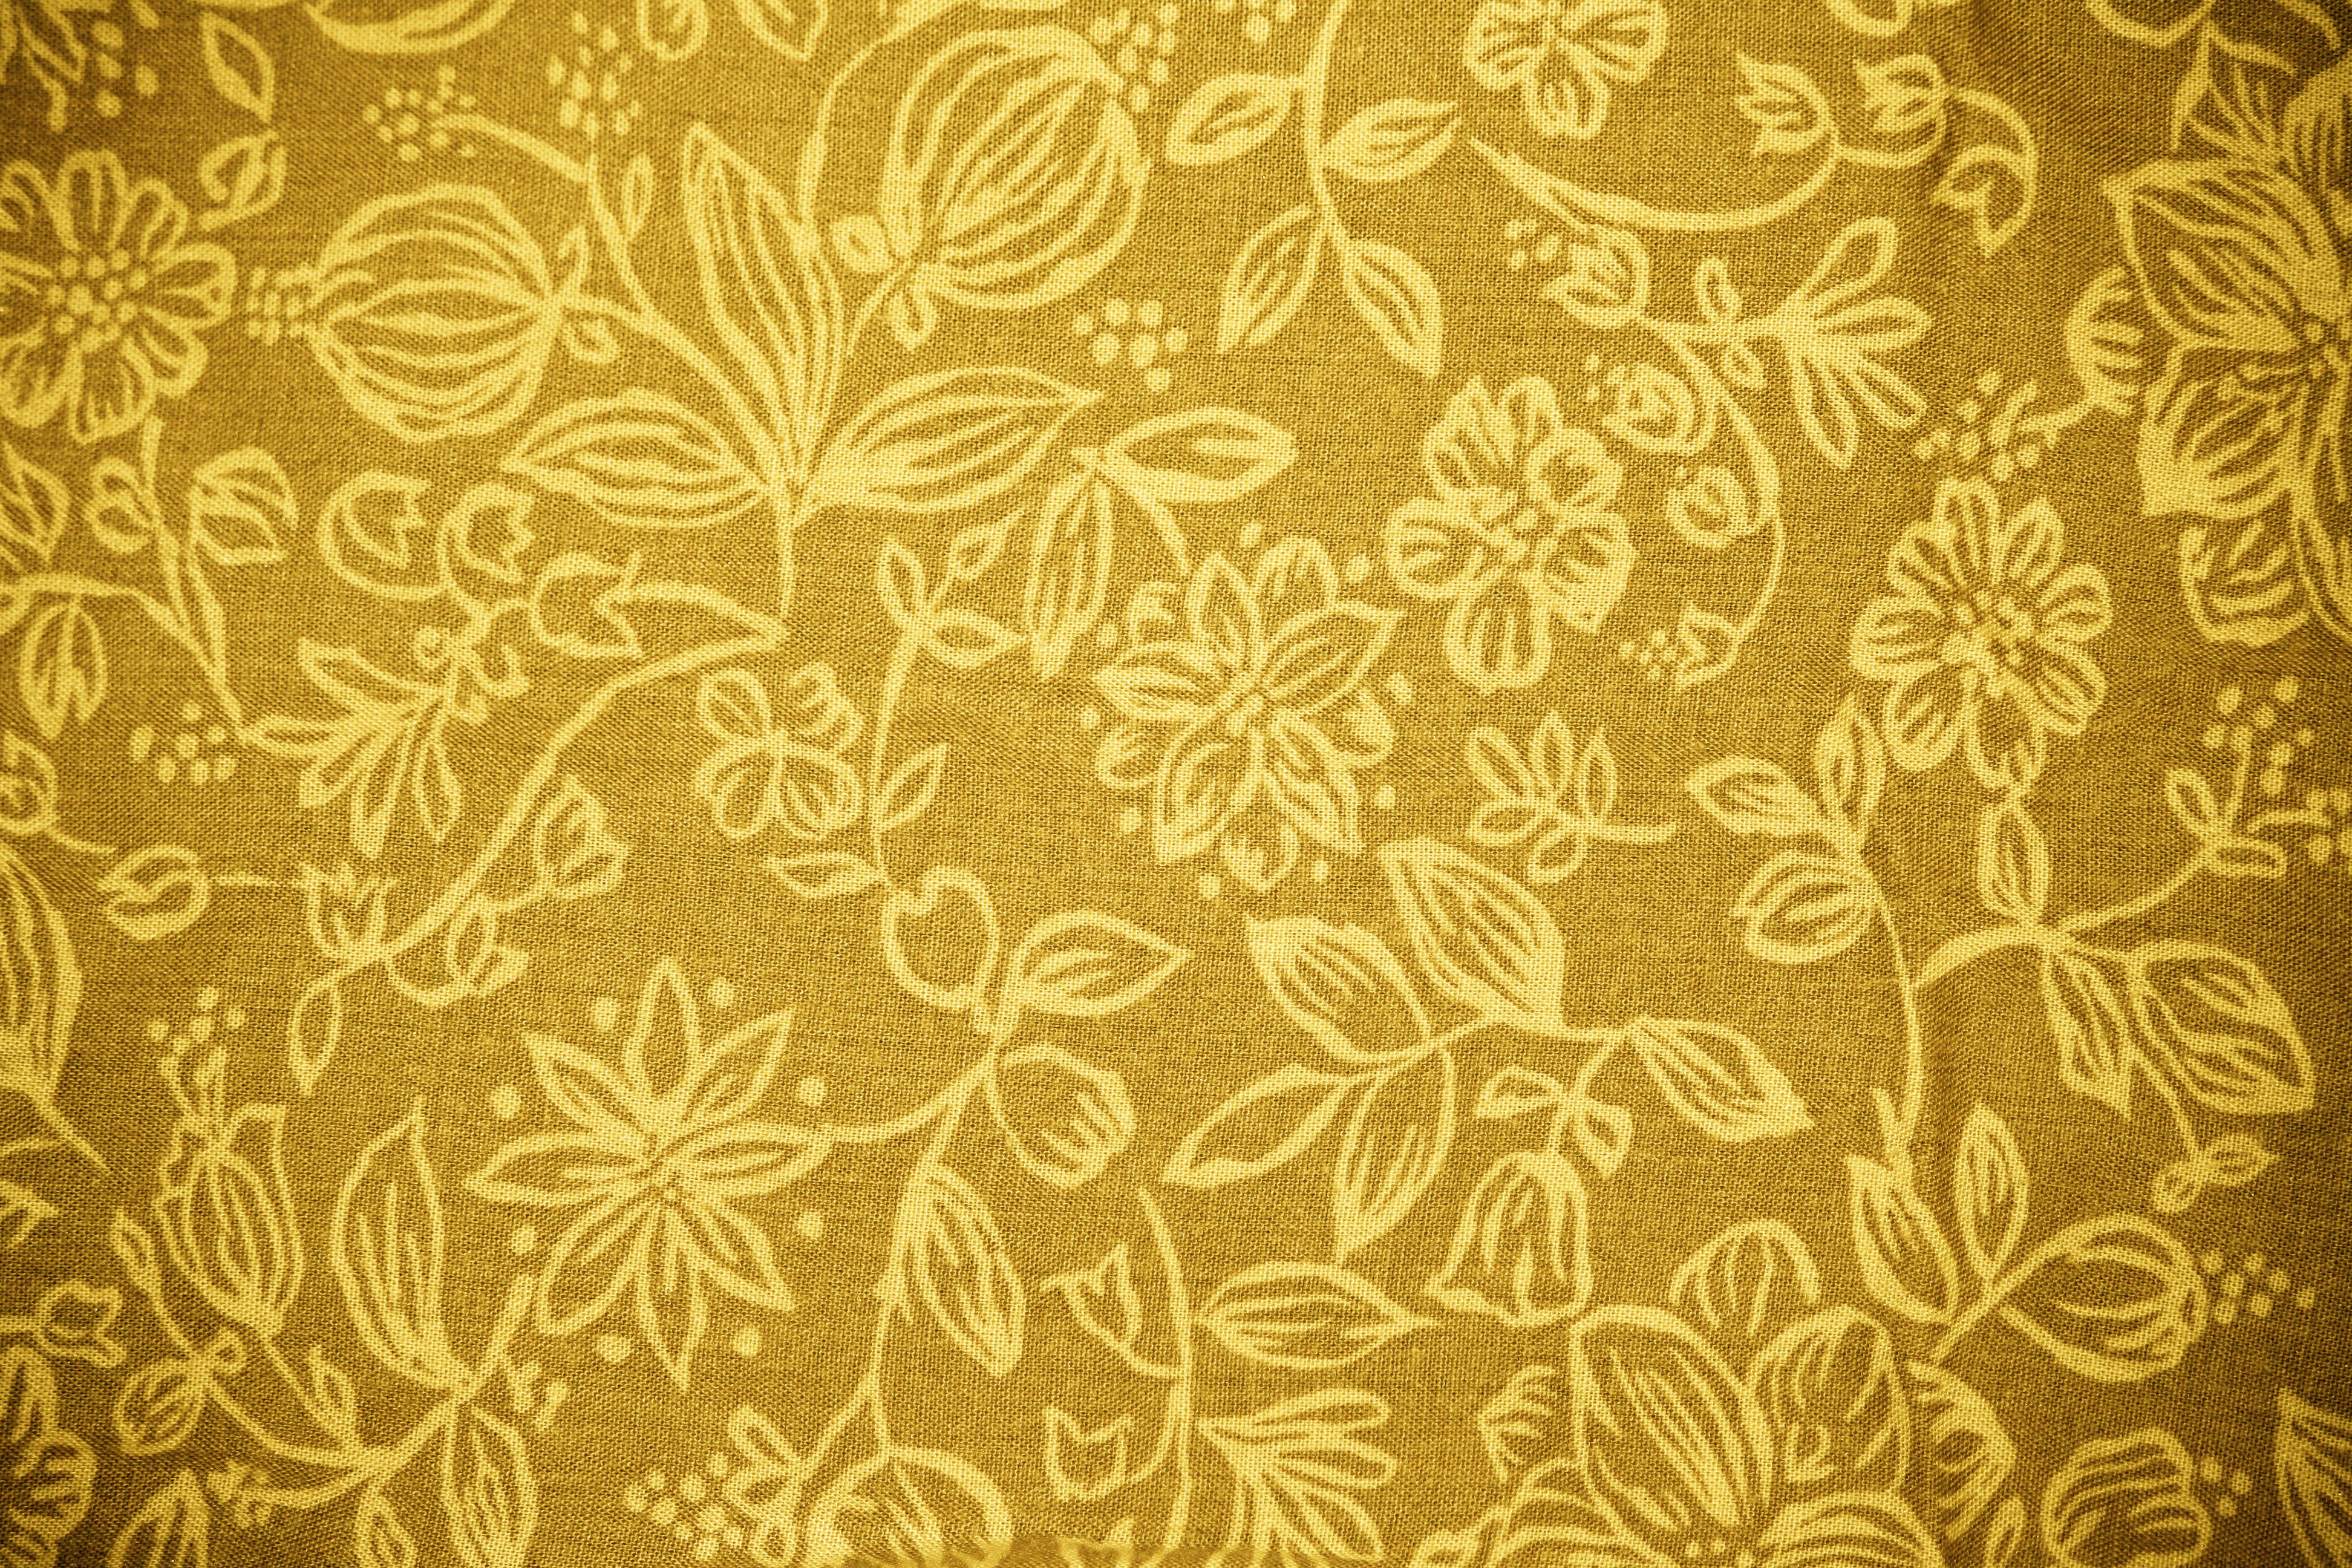 Gold Fabric With Floral Pattern Texture High Resolution Photo